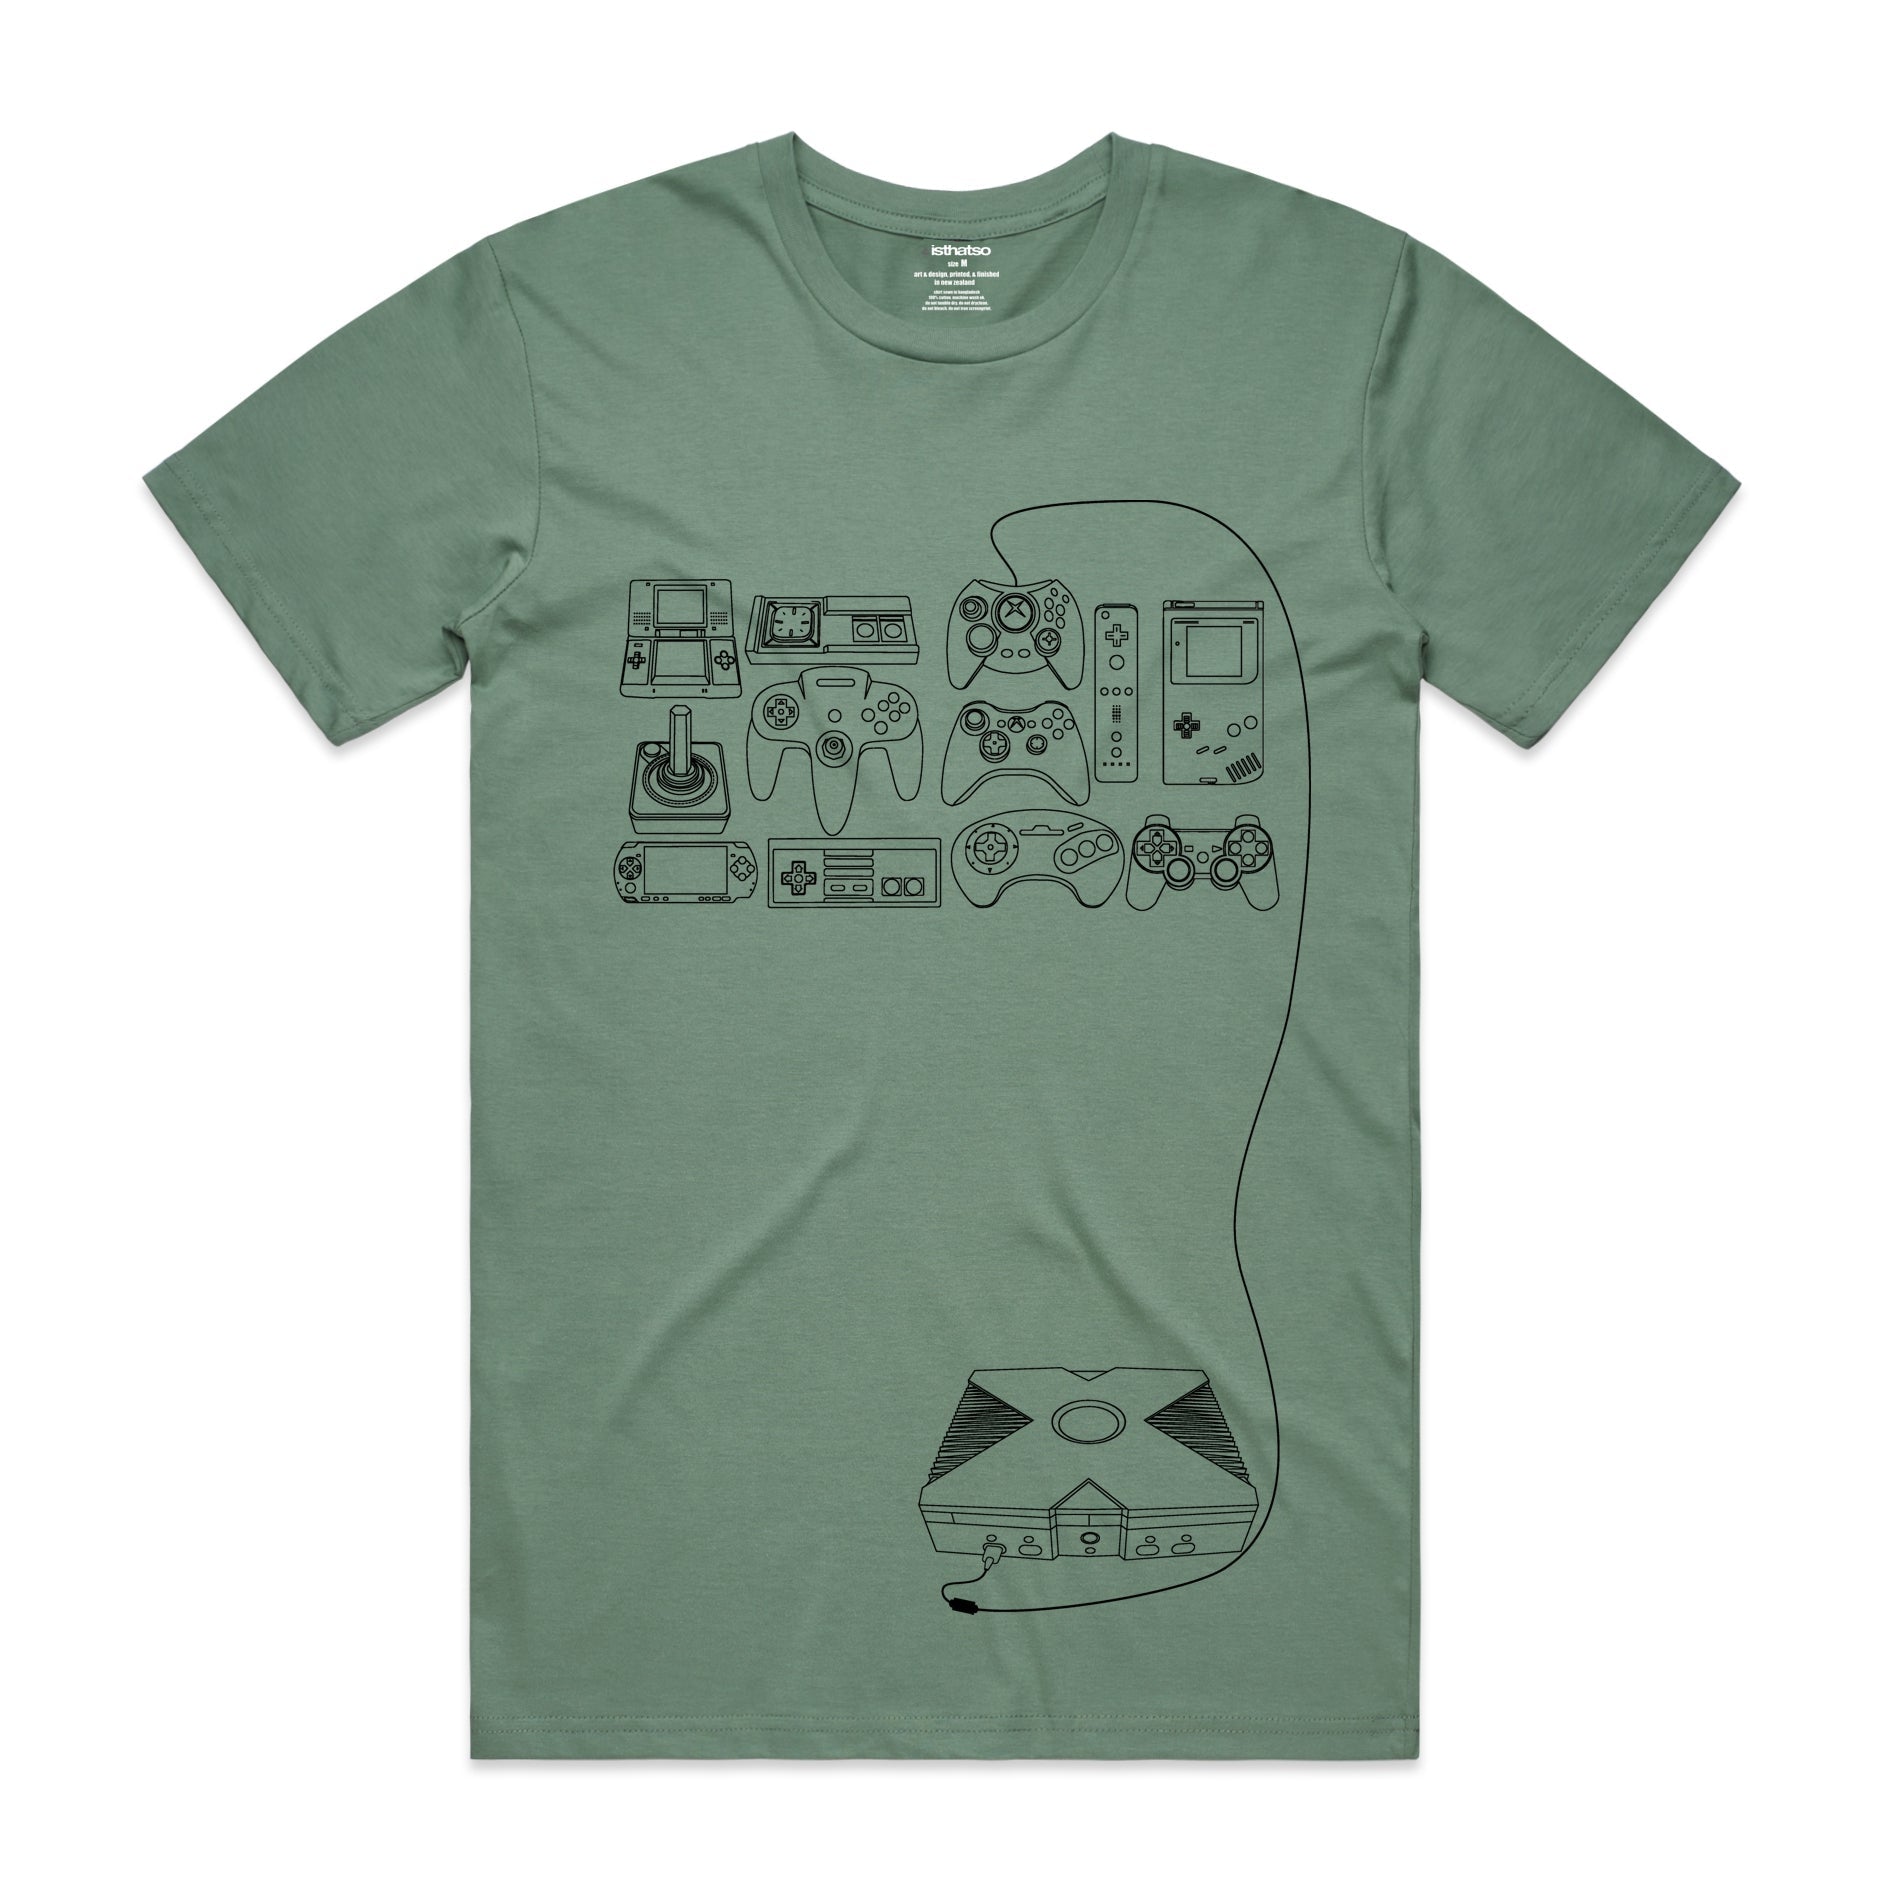 Isthatso - Retro Controllers SS Tee - Sage Green